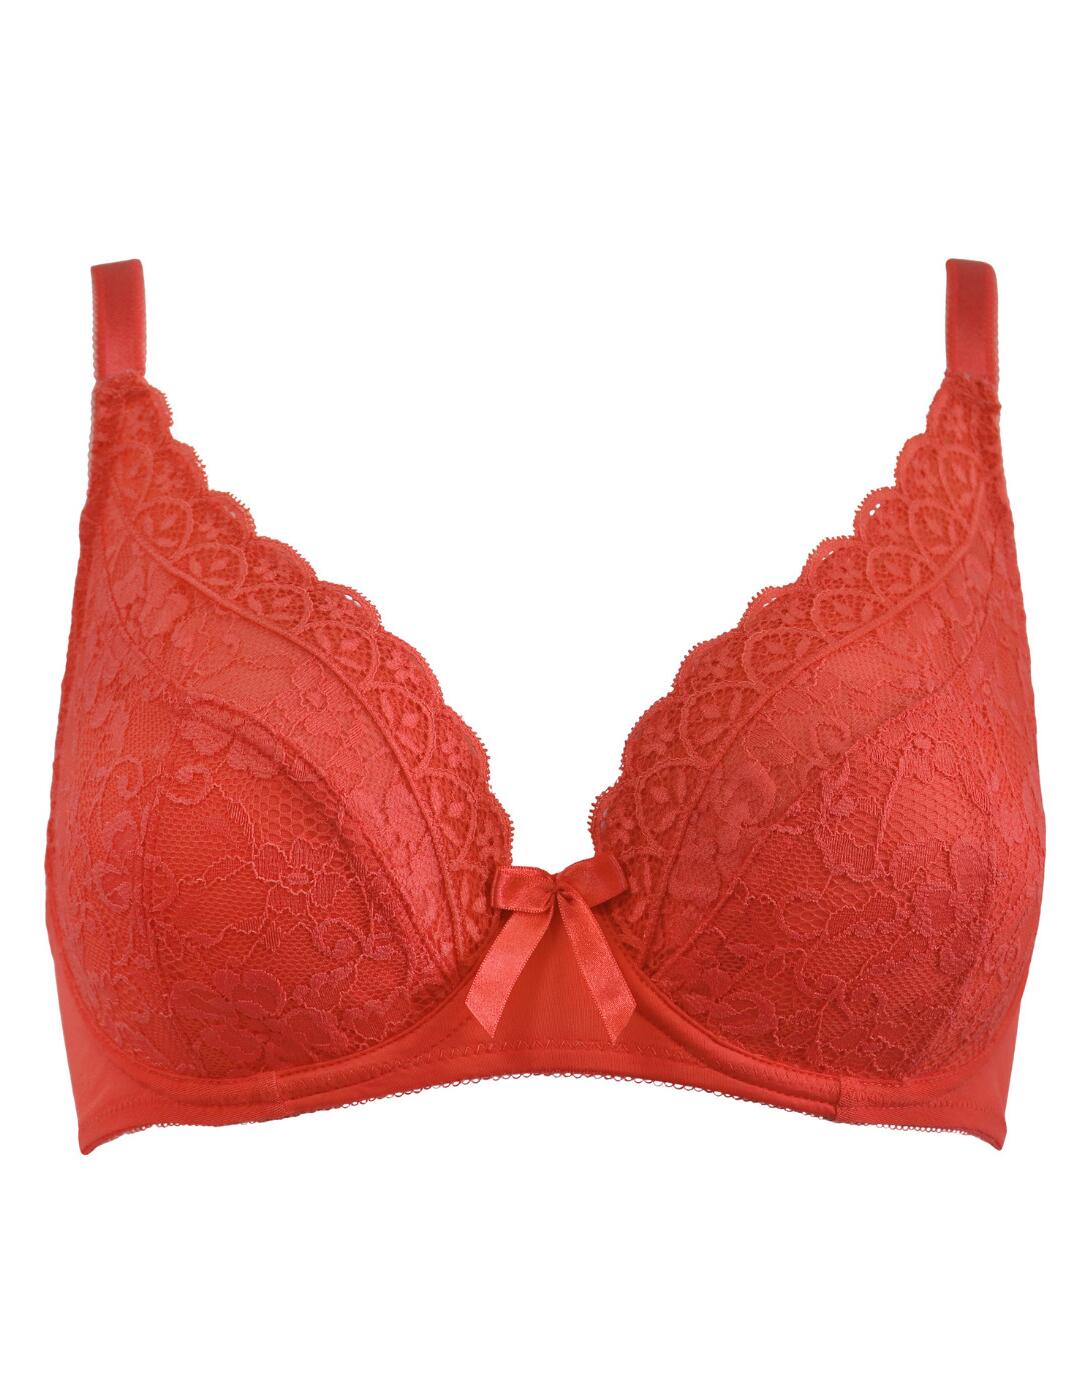 Pour Moi Rebel Padded Plunge Red Bra 84000